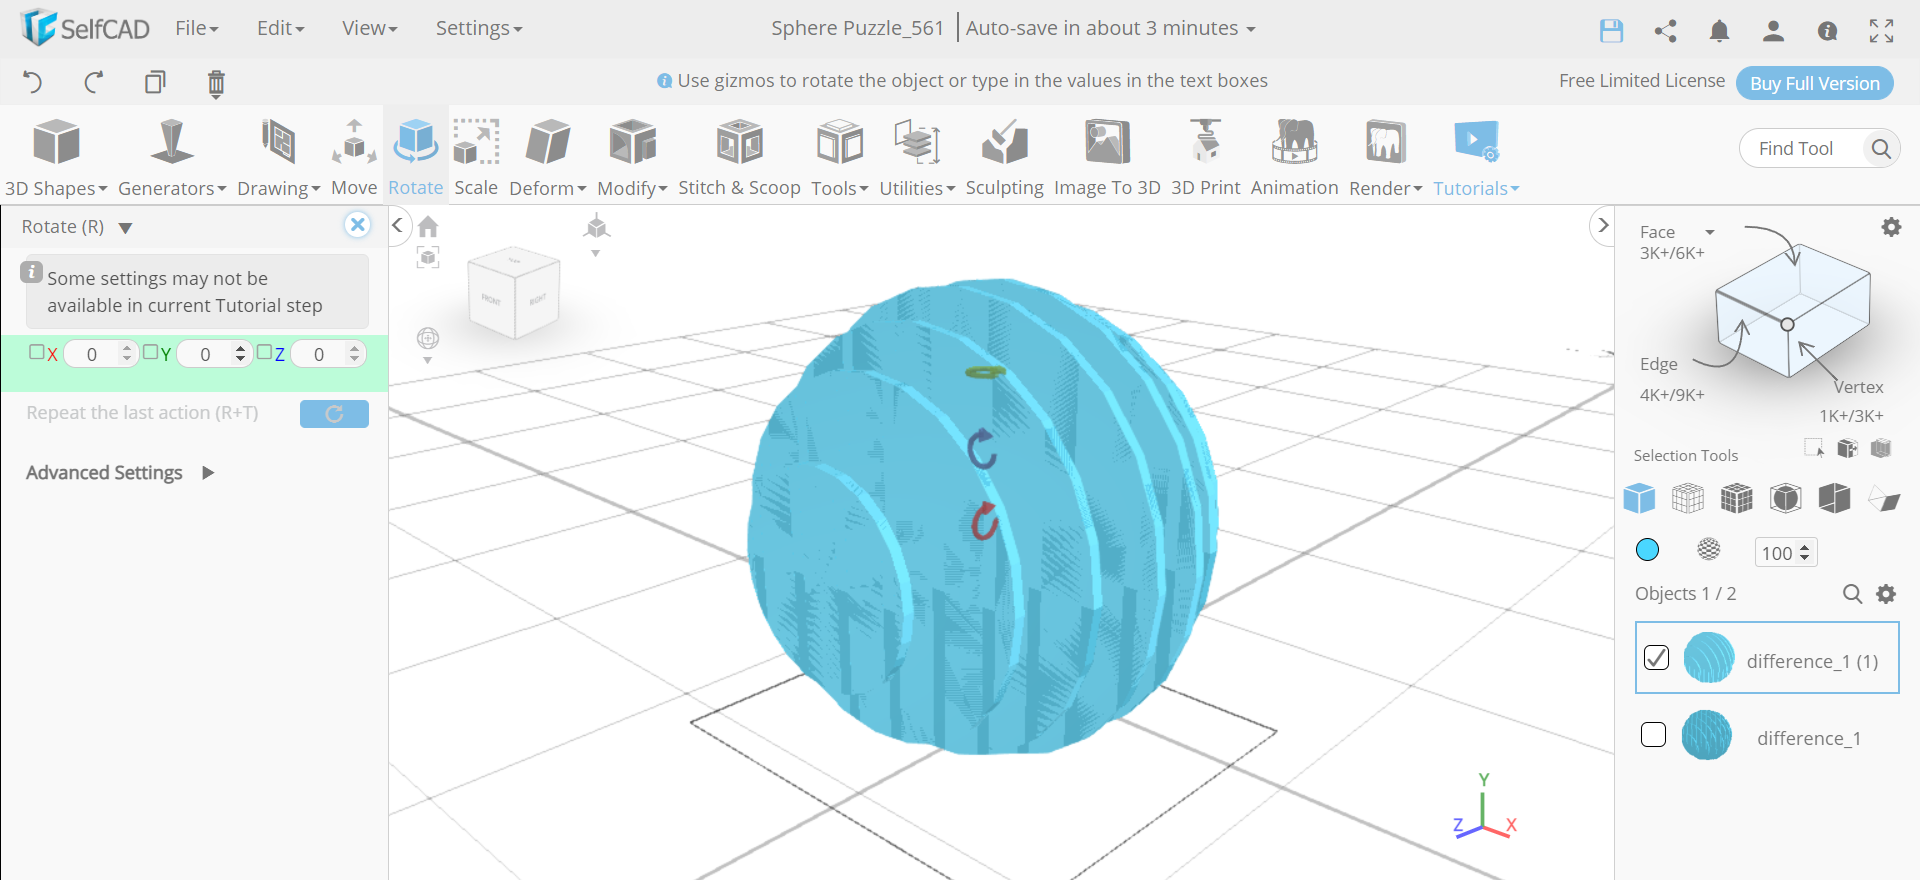 HOW TO CREATE A 3D SPHERE PUZZLE IN 3D MODELLING SOFTWARE | Android ...